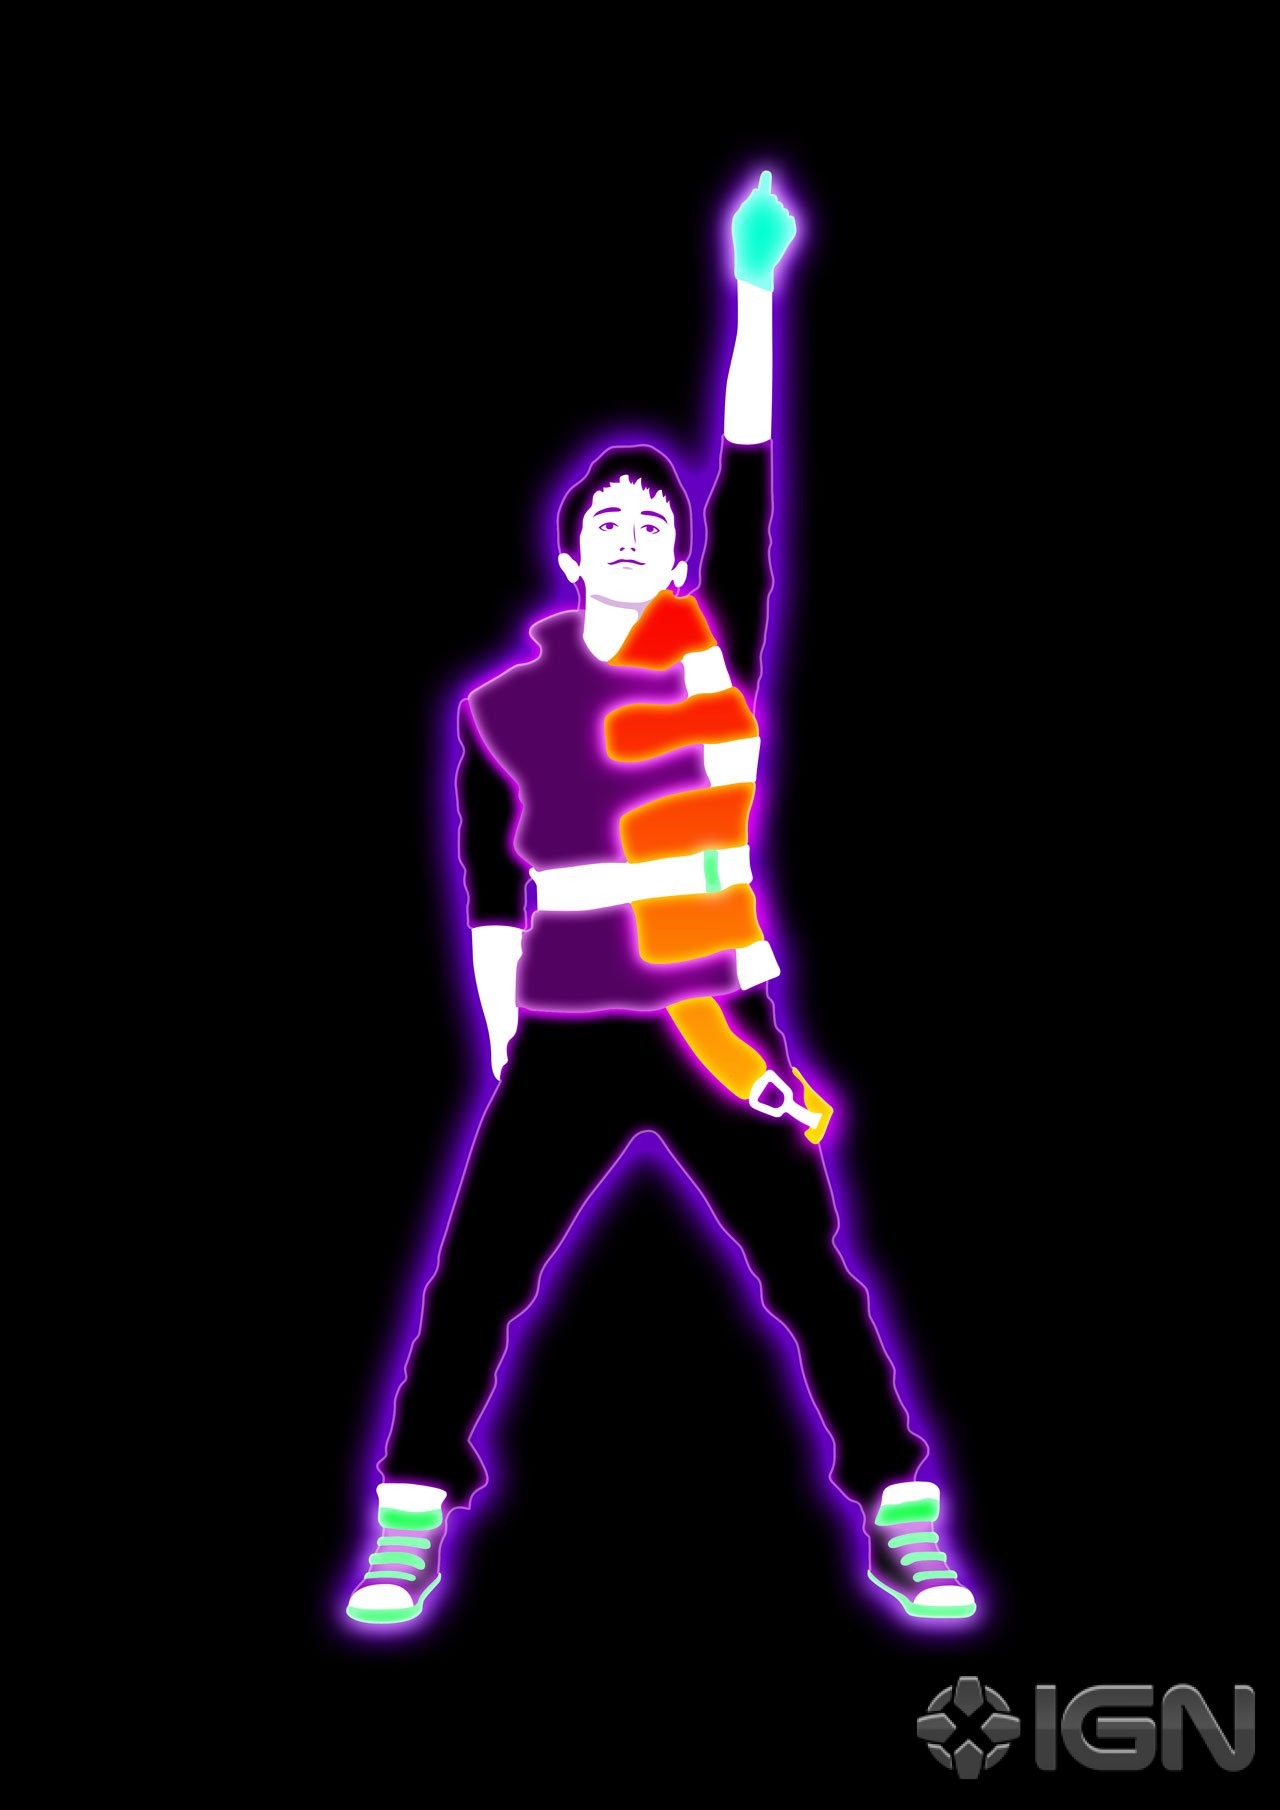 HQ Just Dance 3 Wallpapers | File 95.87Kb